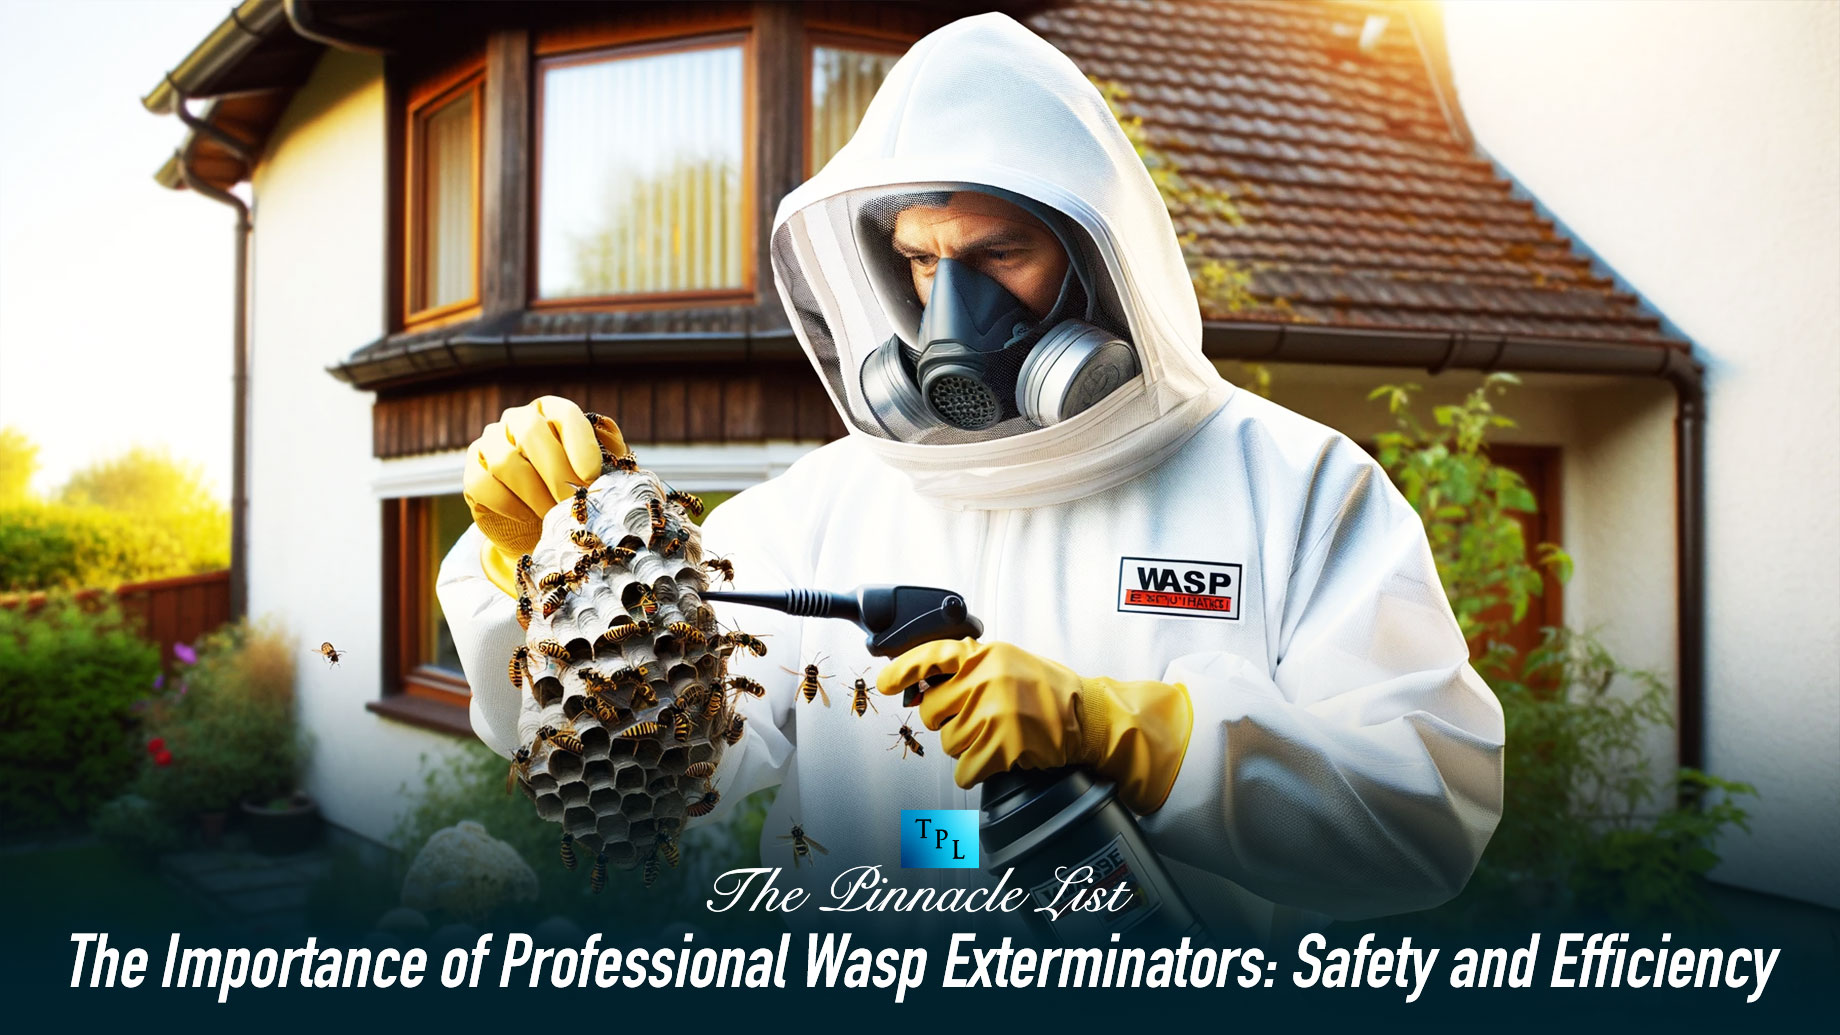 The Importance of Professional Wasp Exterminators: Safety and Efficiency